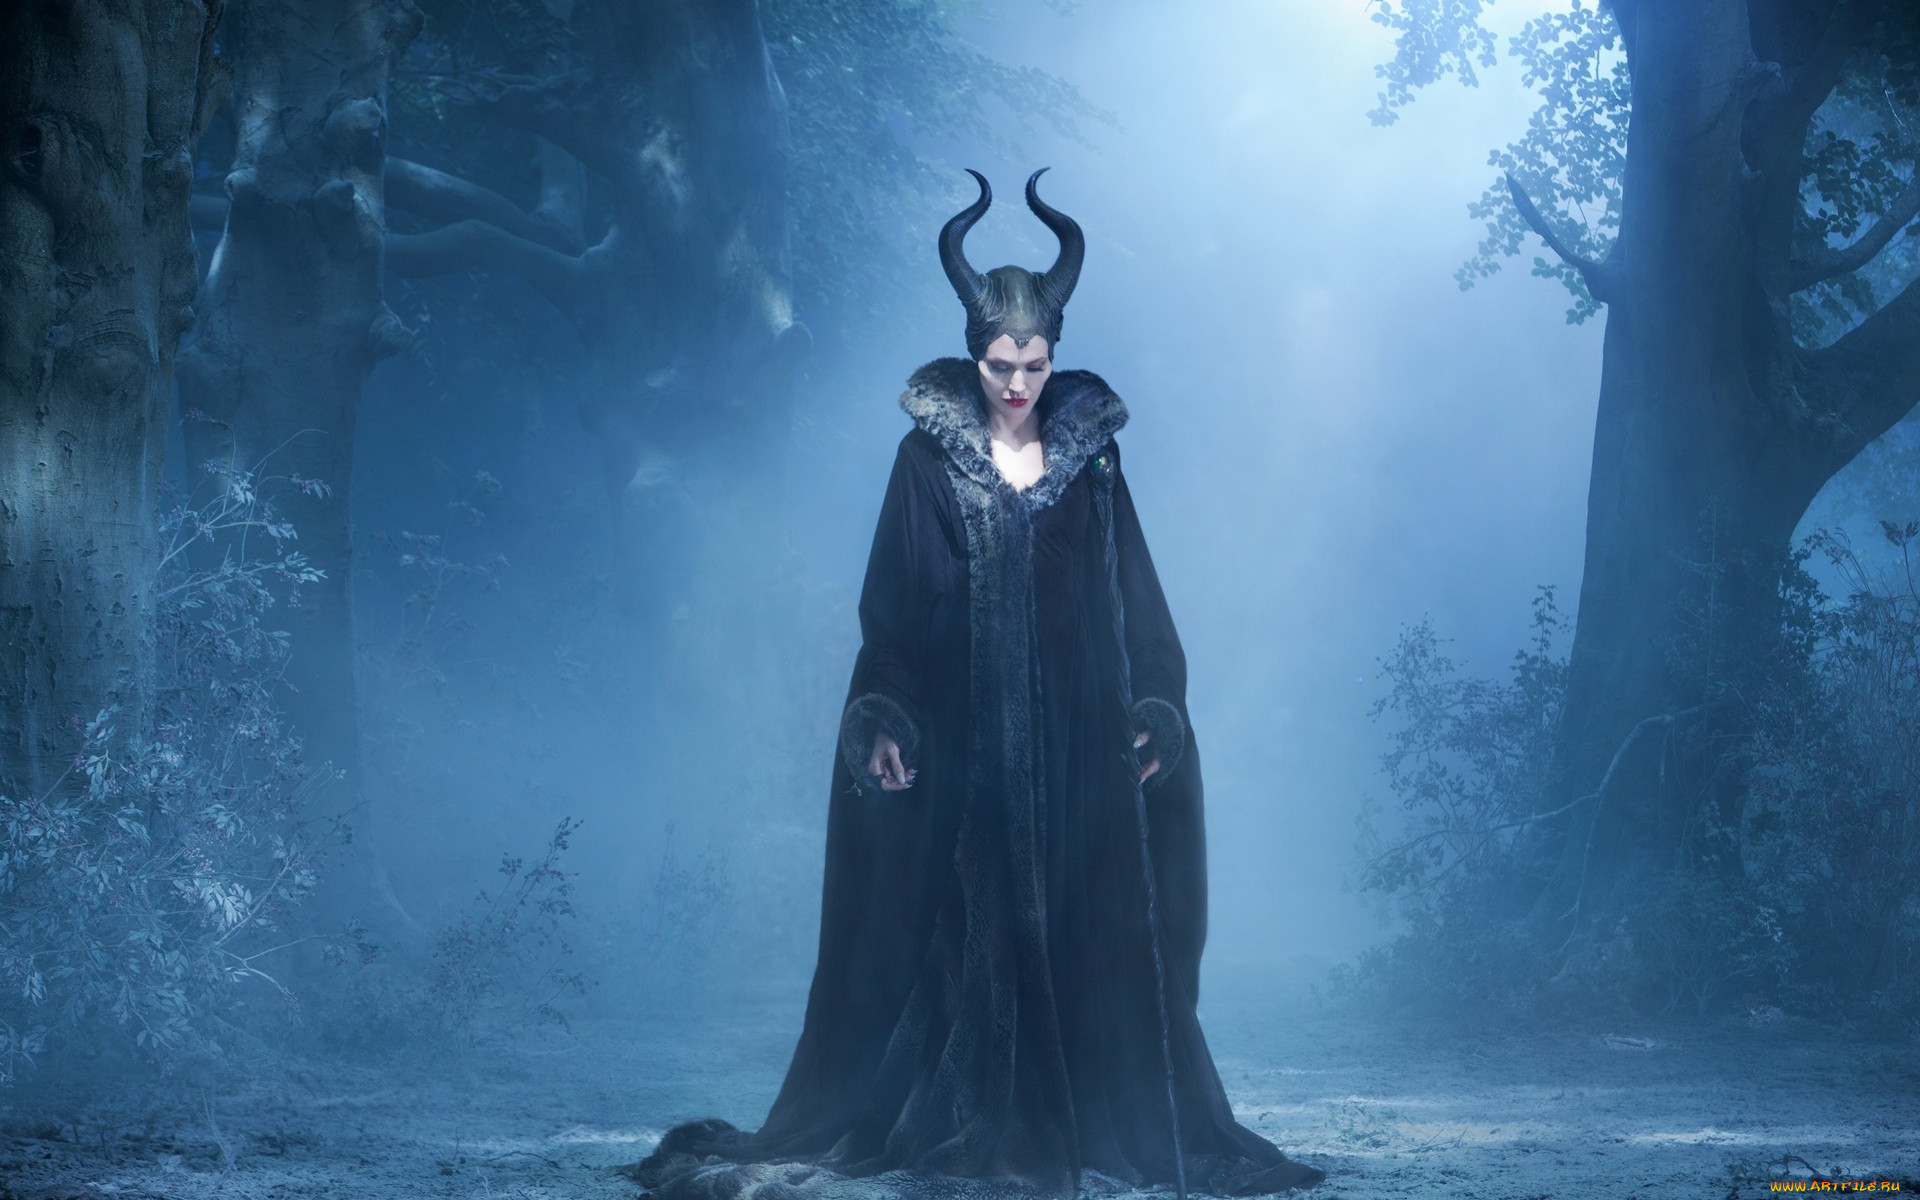  , maleficent, , , , , , the, film, forest, night, witch, rig, rod